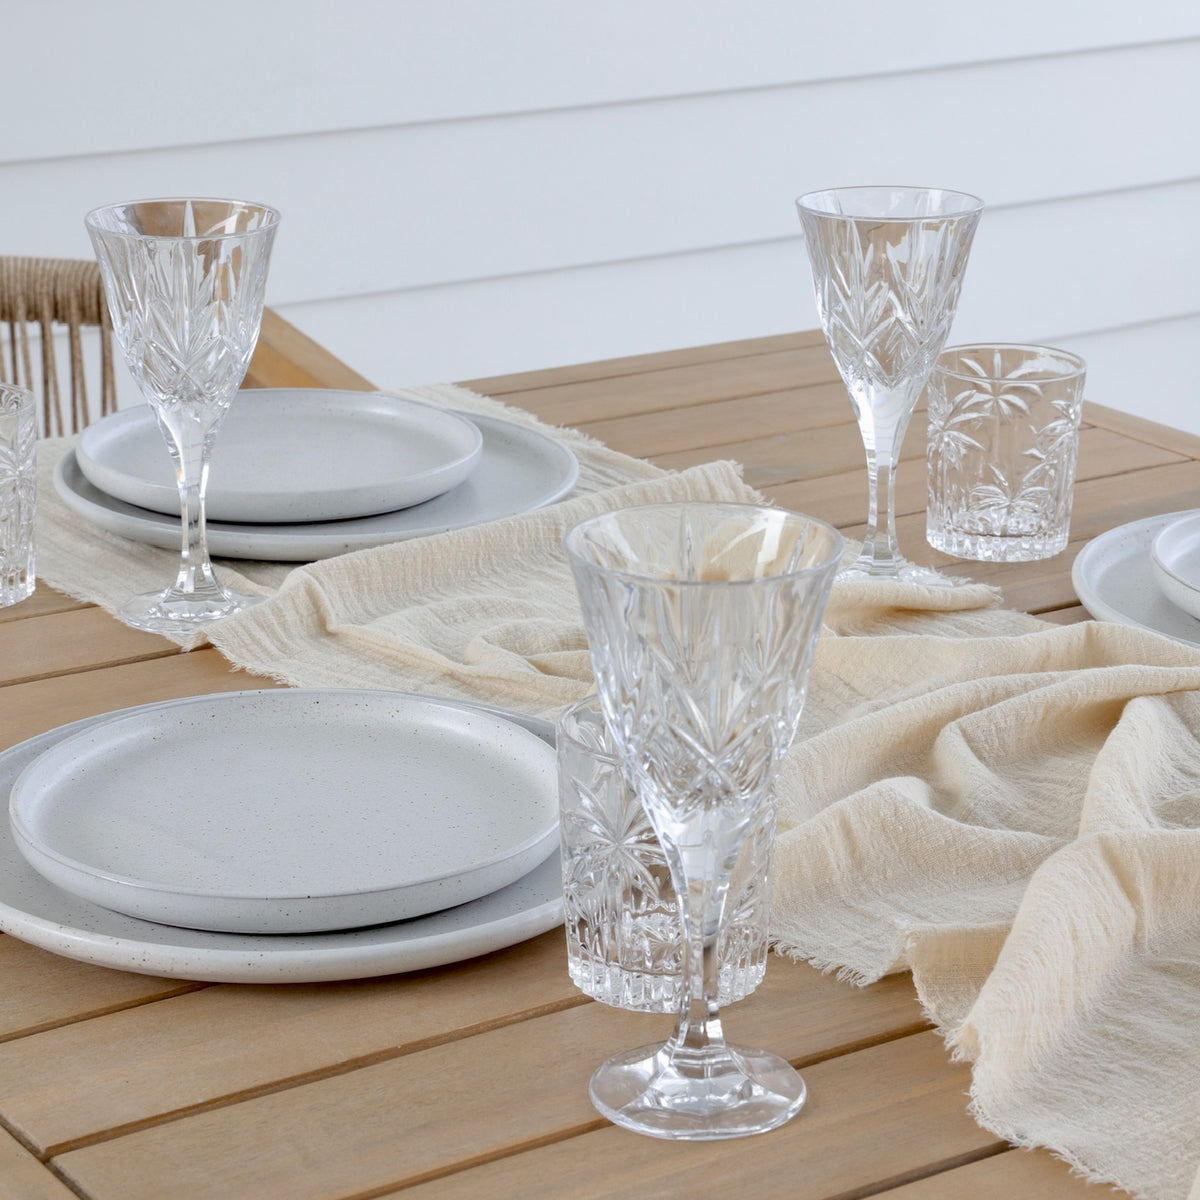 Oatmeal Rustic Cotton Table Runners - 3m